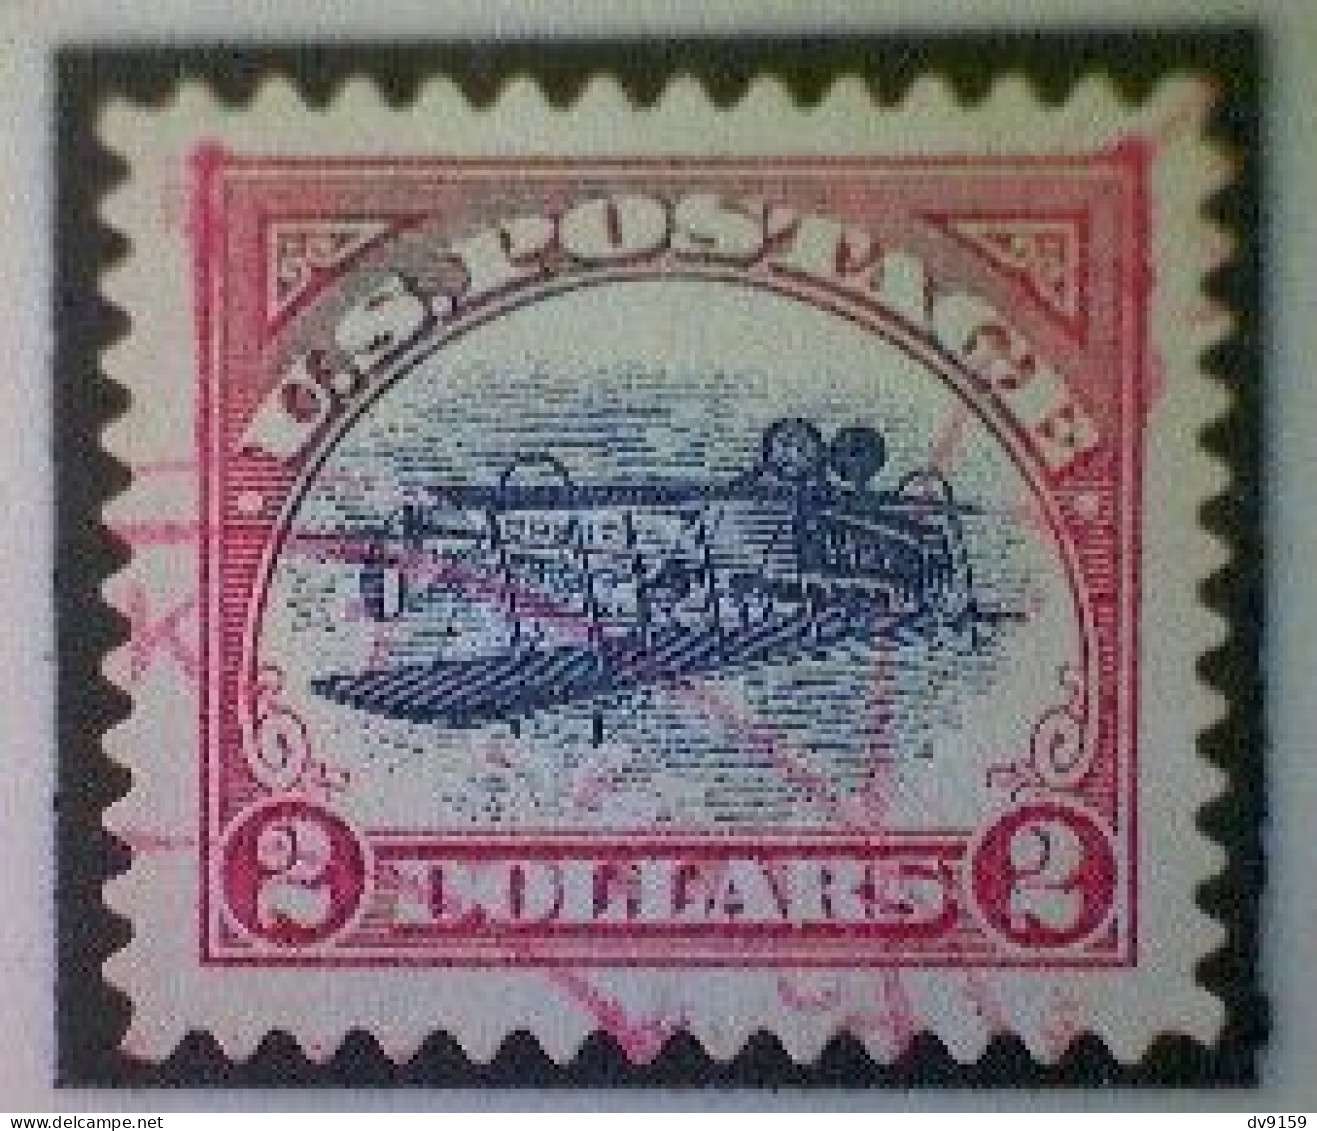 United States, Scott #4806a, Used(o), 2013, Inverted Jenny, Single, $2, Blue, Black, And Red - Usados